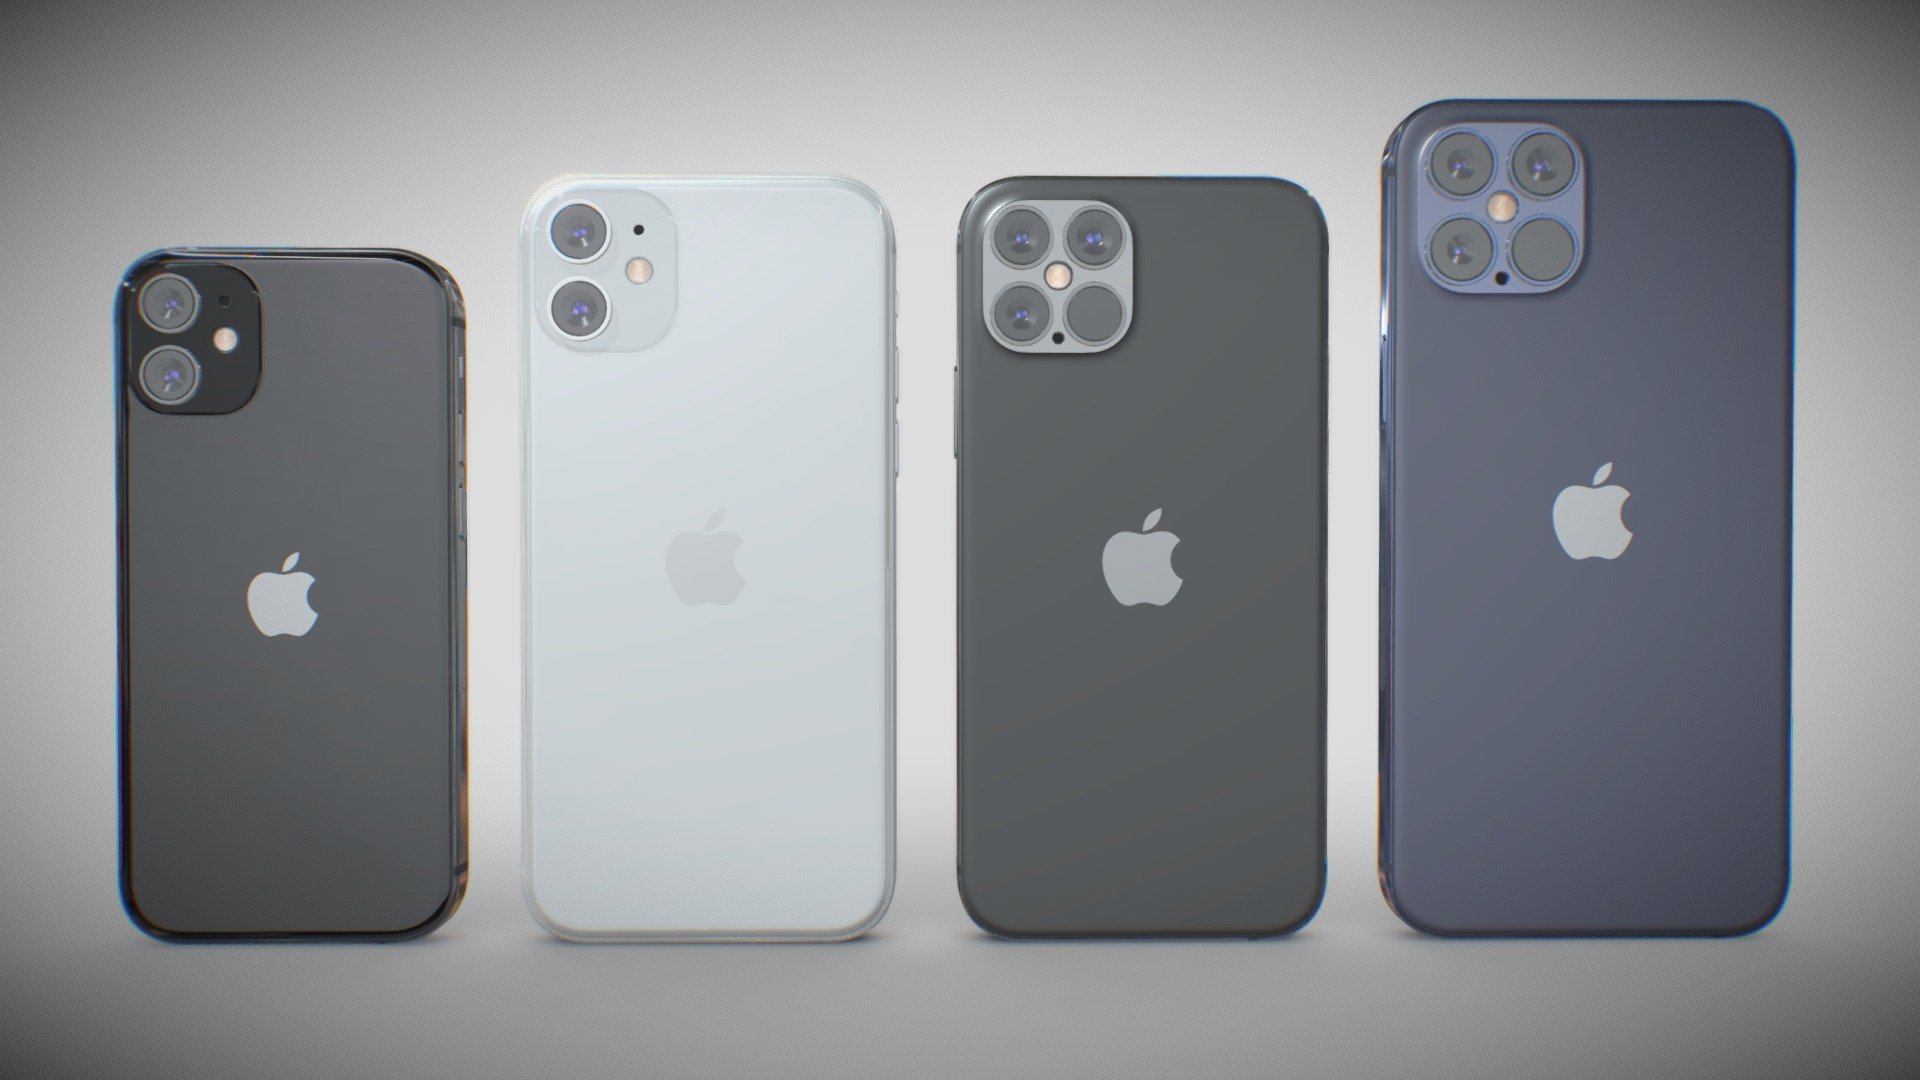 Apple iPhone 15 mini &amp; 15 &amp; 15 pro &amp;15 pro MAX concept.

This set:
- 4 file obj standard
- 1 file 3ds Max 2013 vray material 
- 1 file 3ds Max 2013 corona material
- 4 file of 3Ds
- 4 file e3d full set of materials.
- 4 file cinema 4d standard.
- 4 file blender cycles.

Topology of geometry:




forms and proportions of The 3D model

the geometry of the model was created very neatly

there are no many-sided polygons

detailed enough for close-up renders

the model optimized for turbosmooth modifier

Not collapsed the turbosmooth modified

apply the Smooth modifier with a parameter to get the desired level of detail

Materials and Textures:




3ds max files included Vray-Shaders

3ds max files included Corona-Shaders

all texture paths are cleared

Organization of scene:




to all objects and materials

real world size (system units - mm)

coordinates of location of the model in space (x0, y0, z0)

does not contain extraneous or hidden objects (lights, cameras, shapes etc.)
 - Apple iPhone 15 mini & 15 & 15 pro &15 pro MAX - Buy Royalty Free 3D model by madMIX 3d model